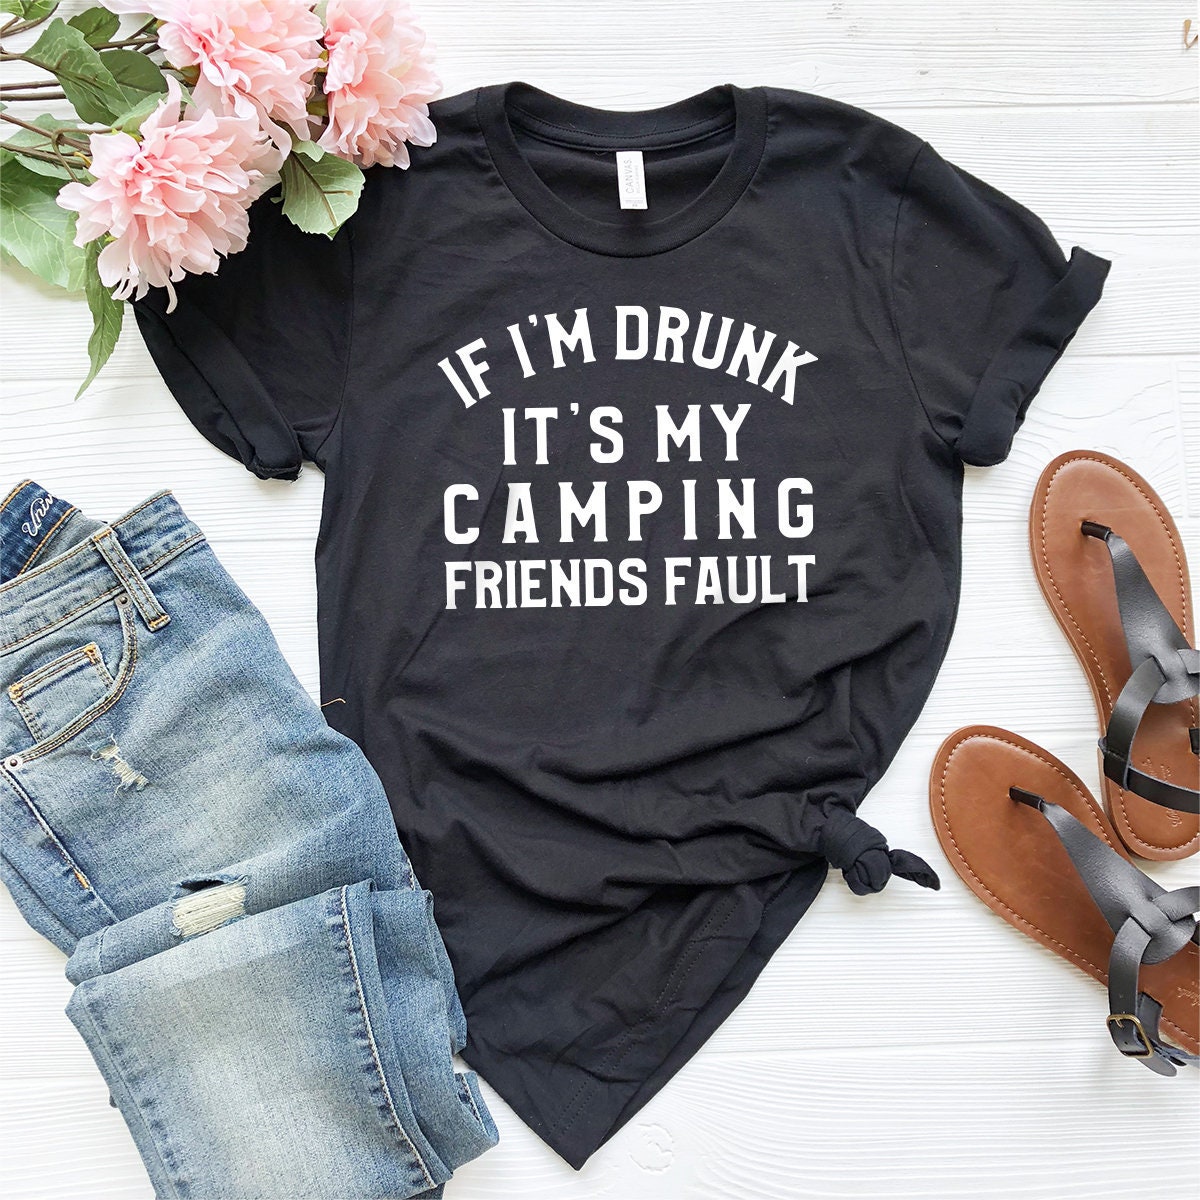 Camping Shirt ,Drinking Shirt, Best Friends Shirt, Funny Drinking Shirt, Yes I Am Drunk It's My Camping Friends Fault - Fastdeliverytees.com